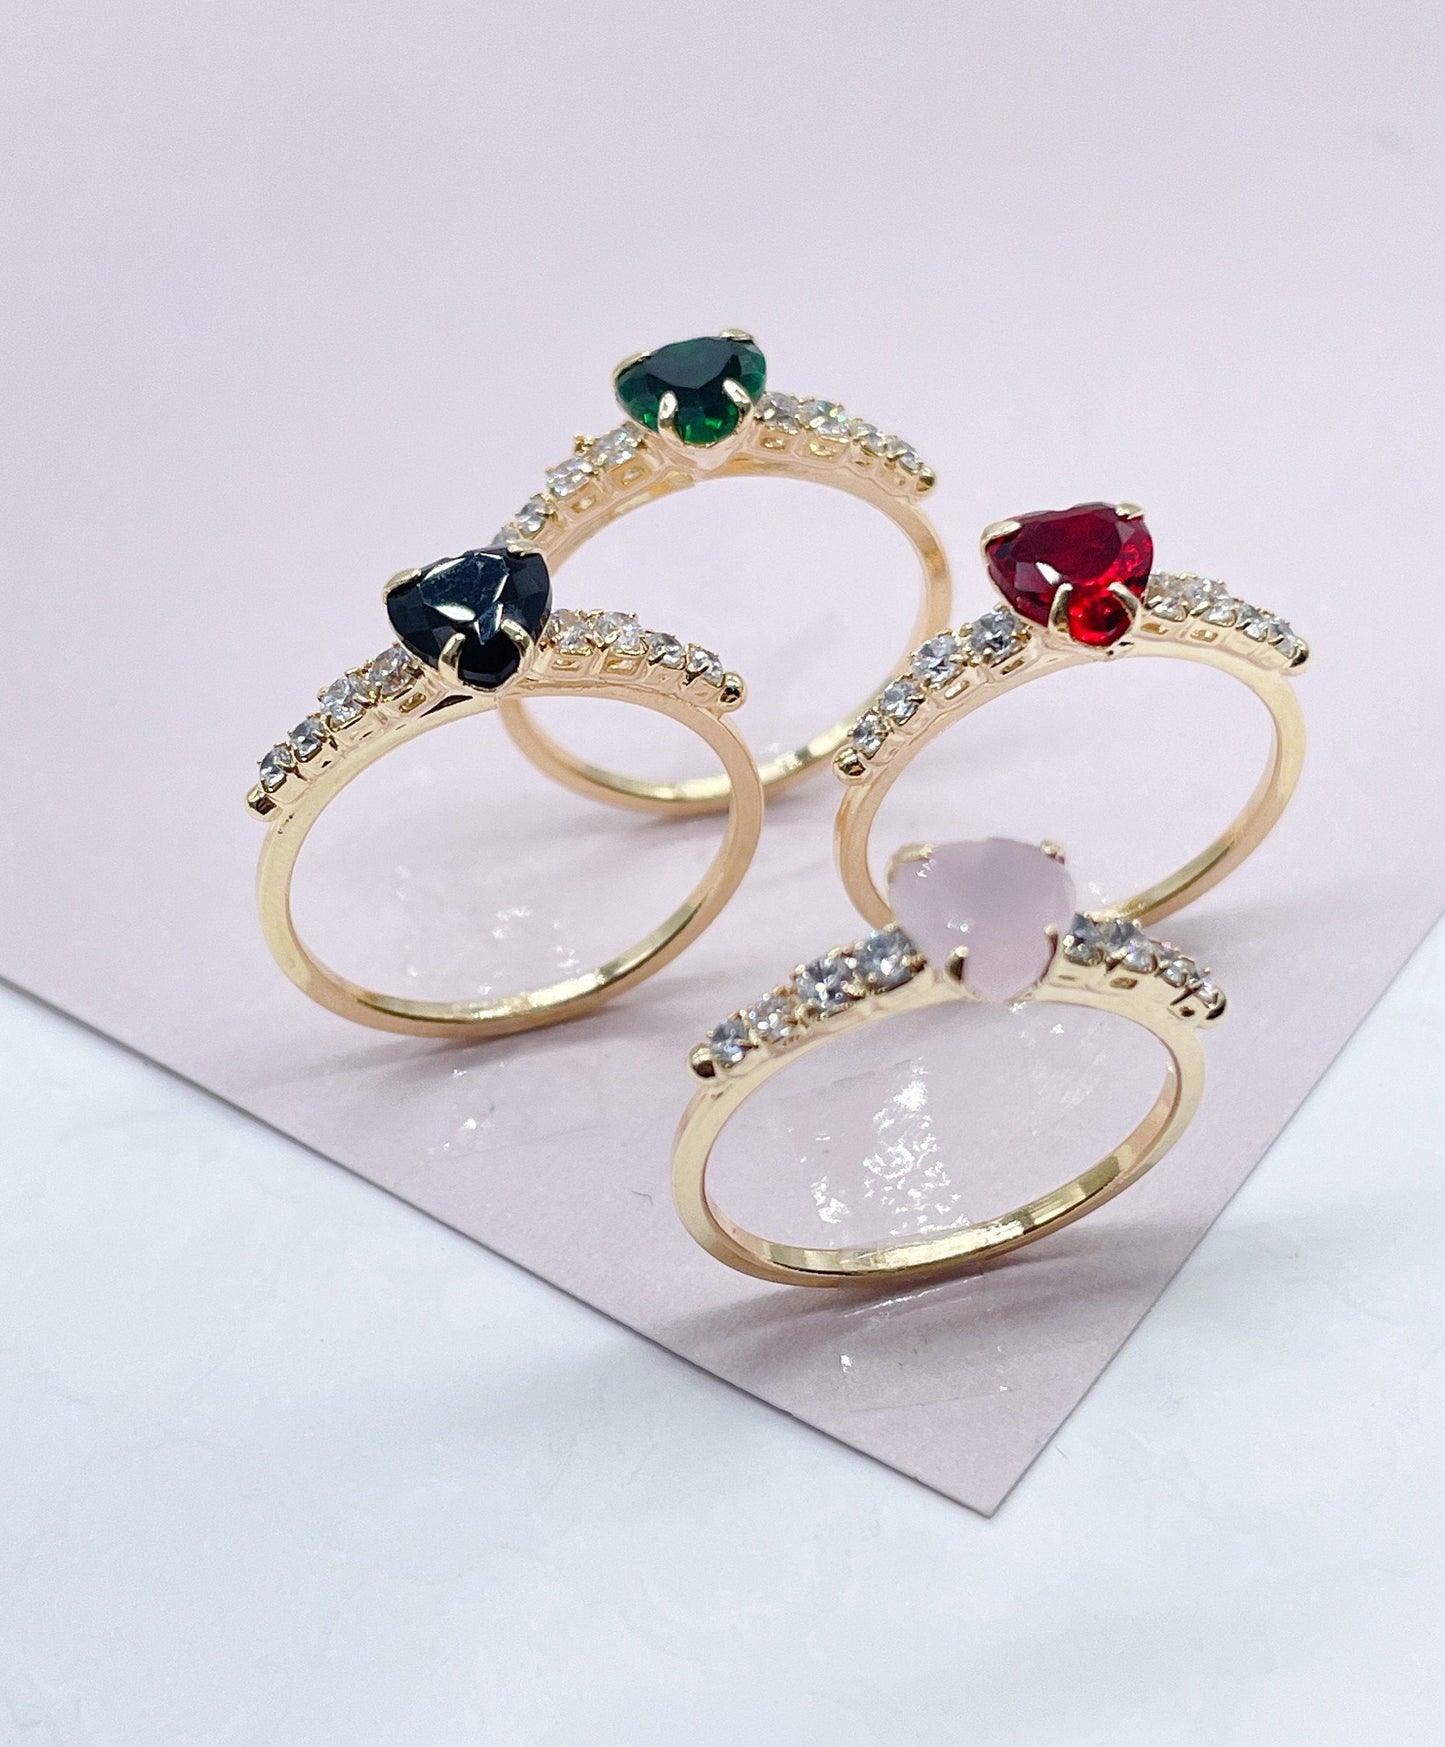 18k Gold Layered Heart Ring With Small Pave Colorless Cubic Zirconia Stones On